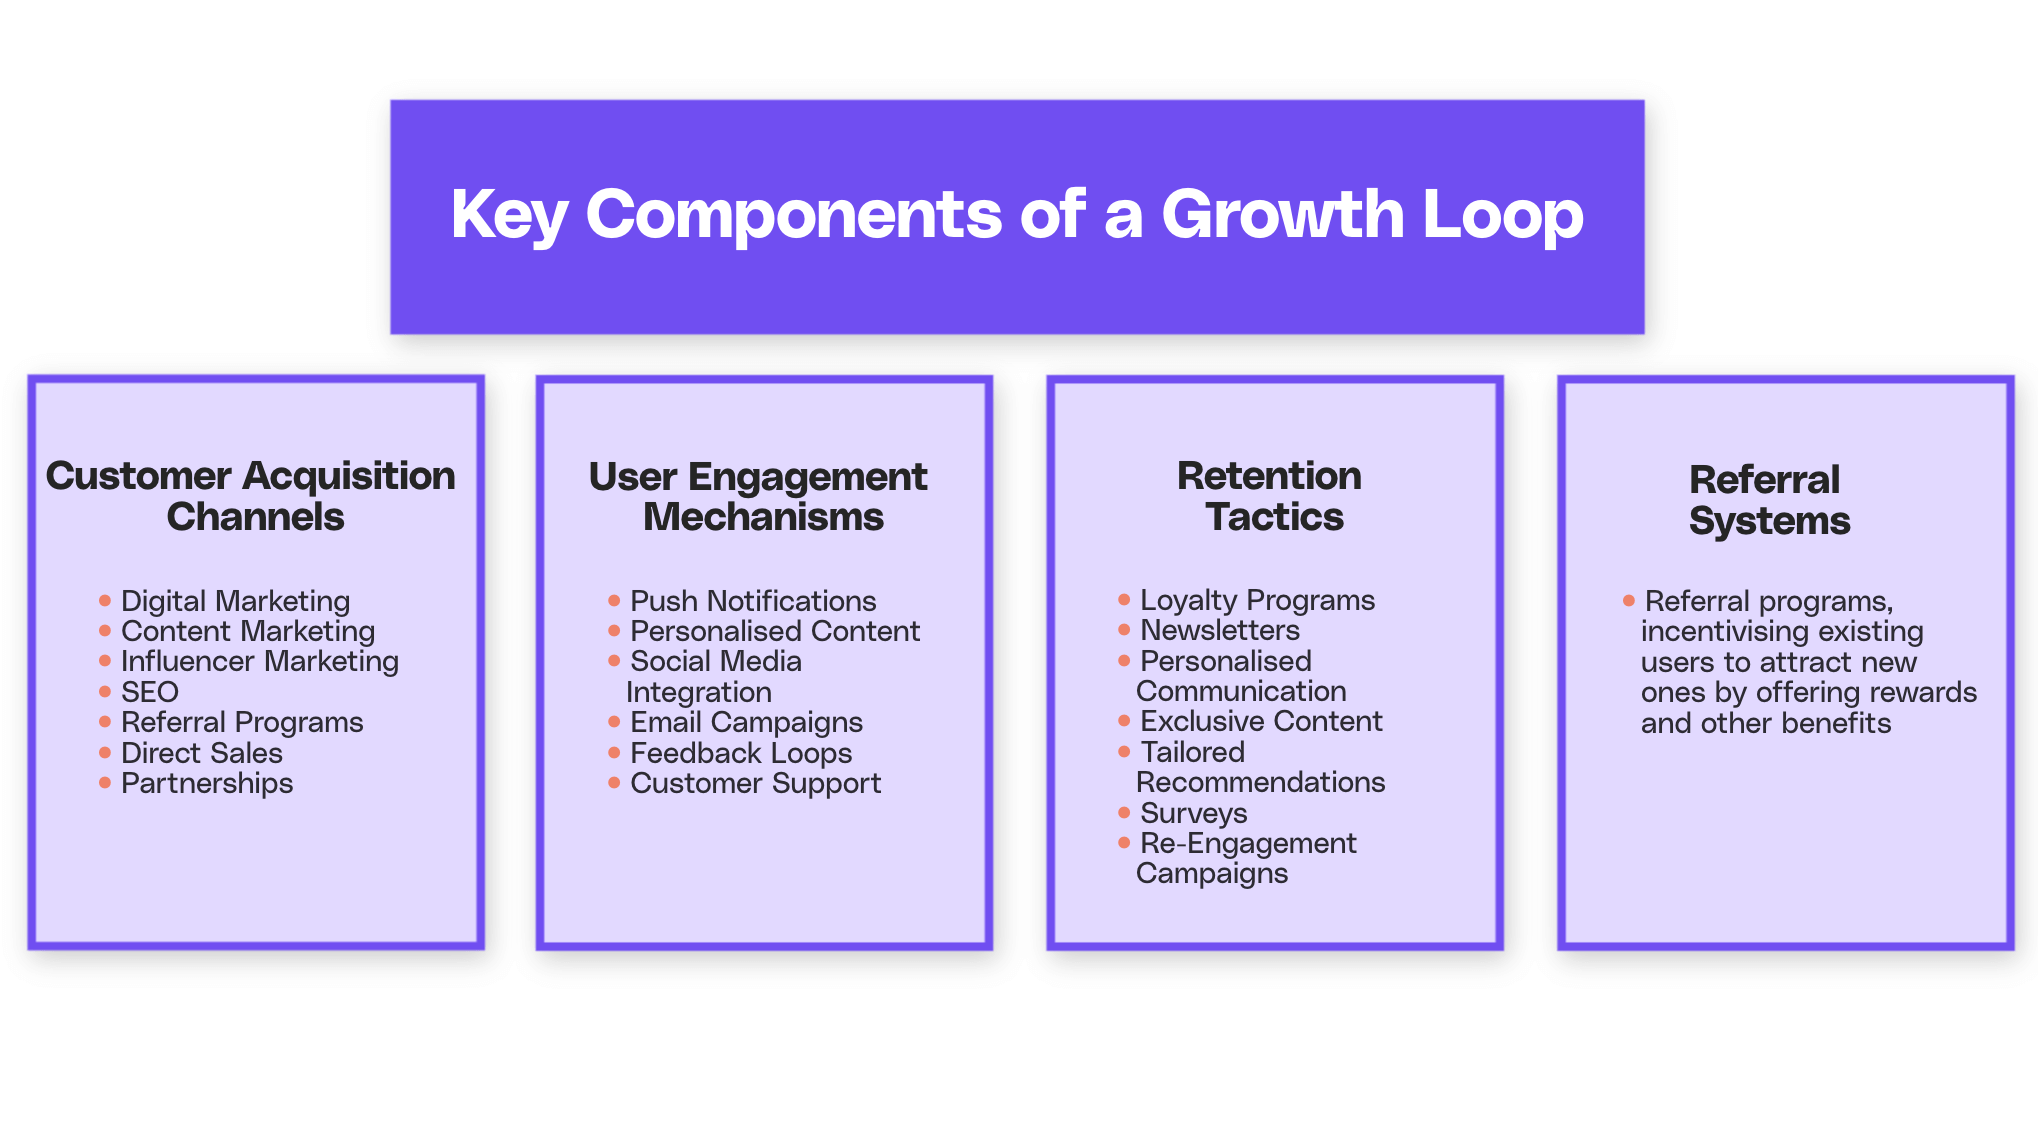 Key components of a growth loop